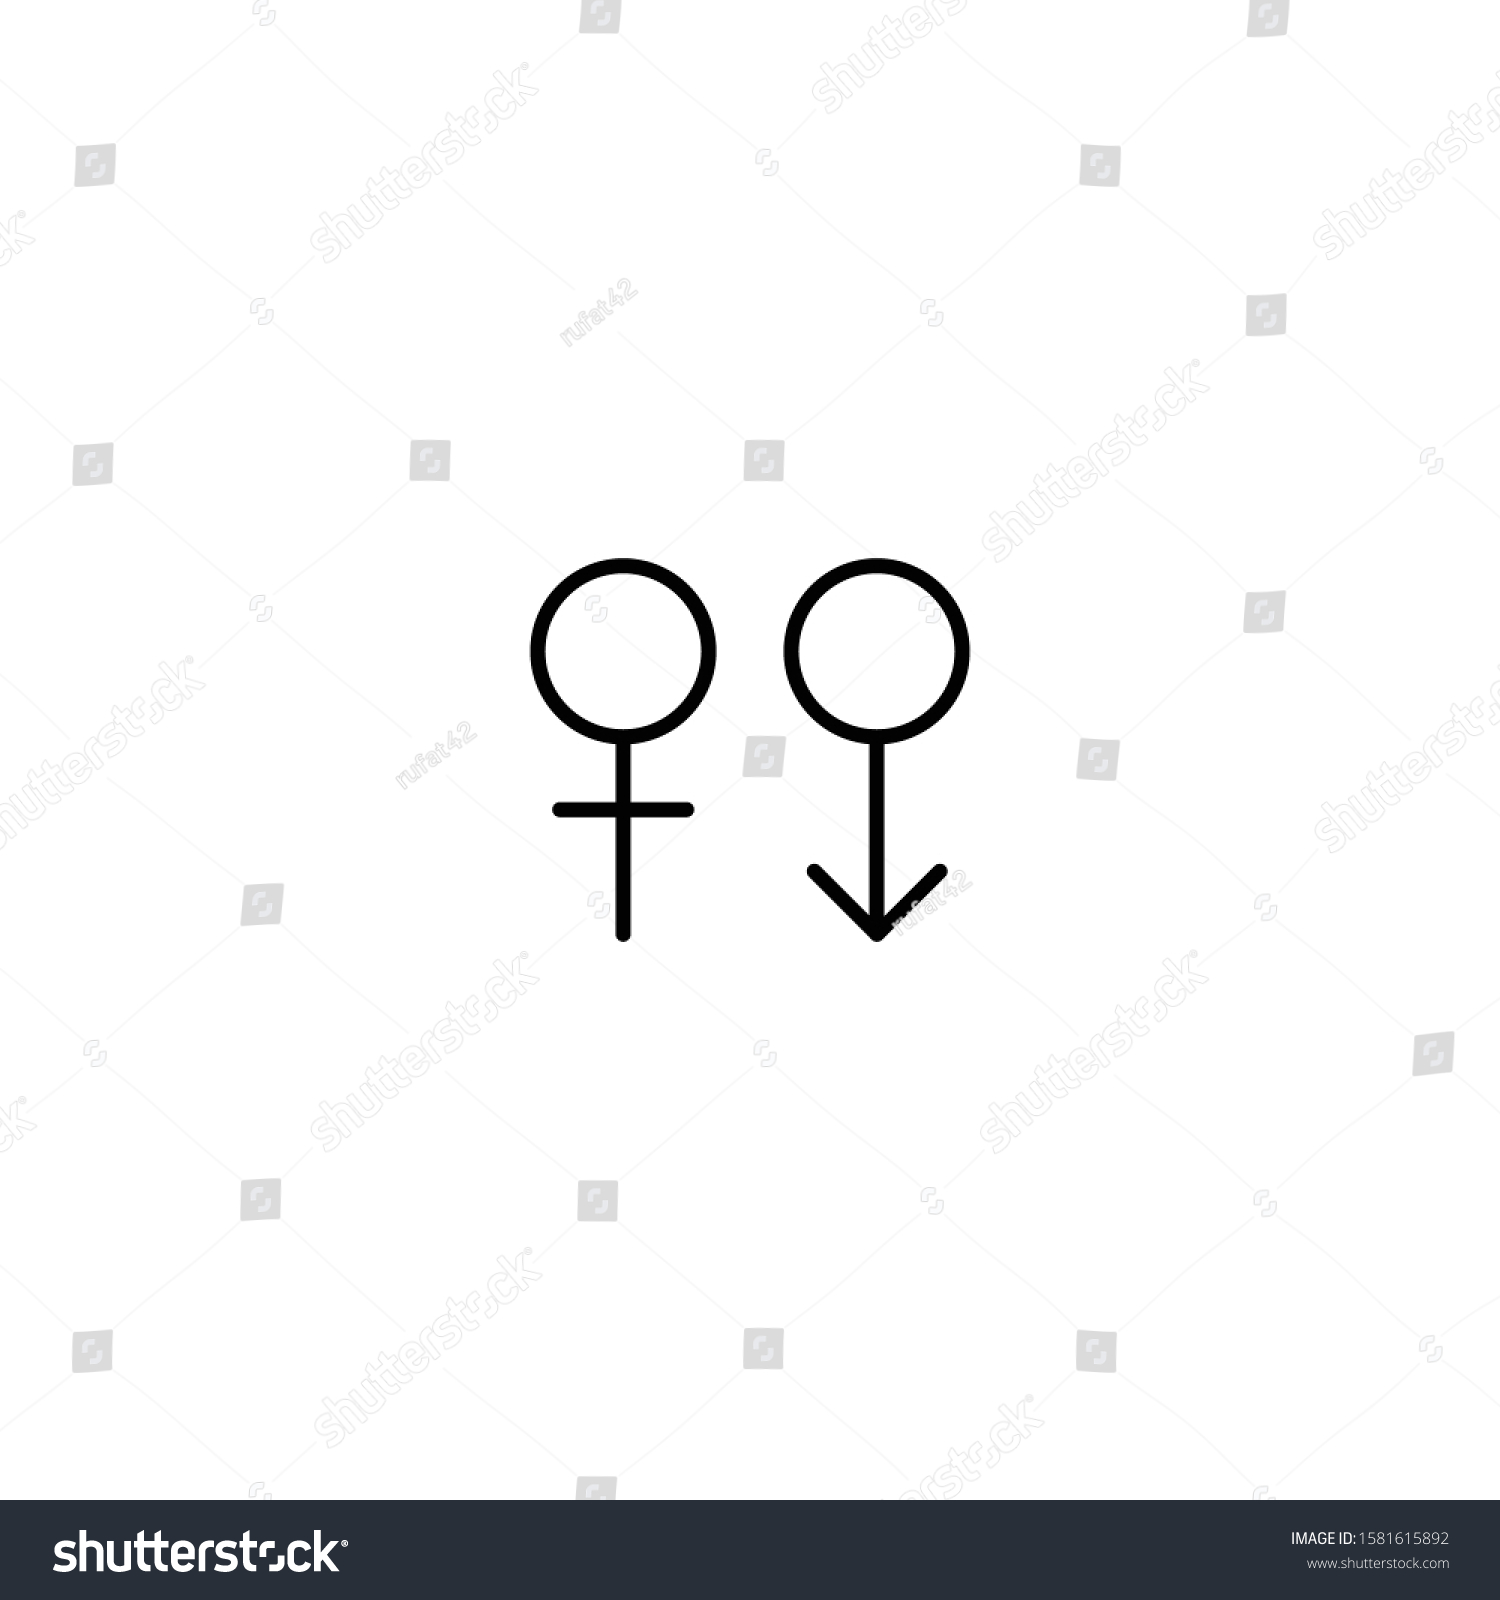 Sexuality Icon Man Woman Vector Illustration Stock Vector Royalty Free 1581615892 Shutterstock 